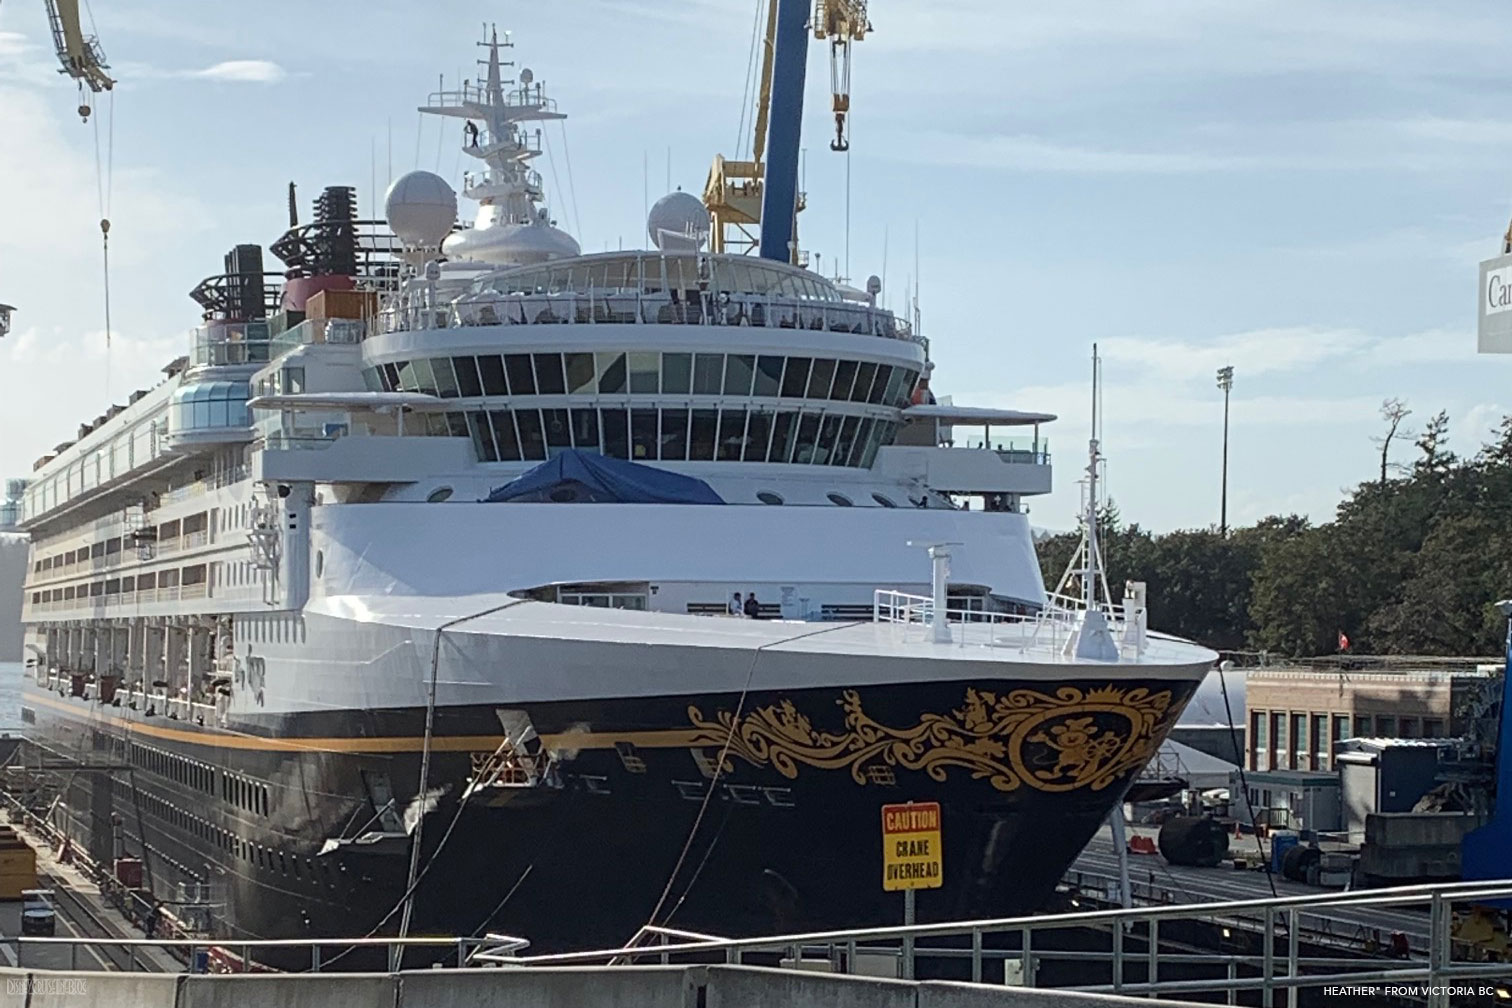 A Glimpse of the Disney Wonder in a Victoria Dry Dock • The Disney